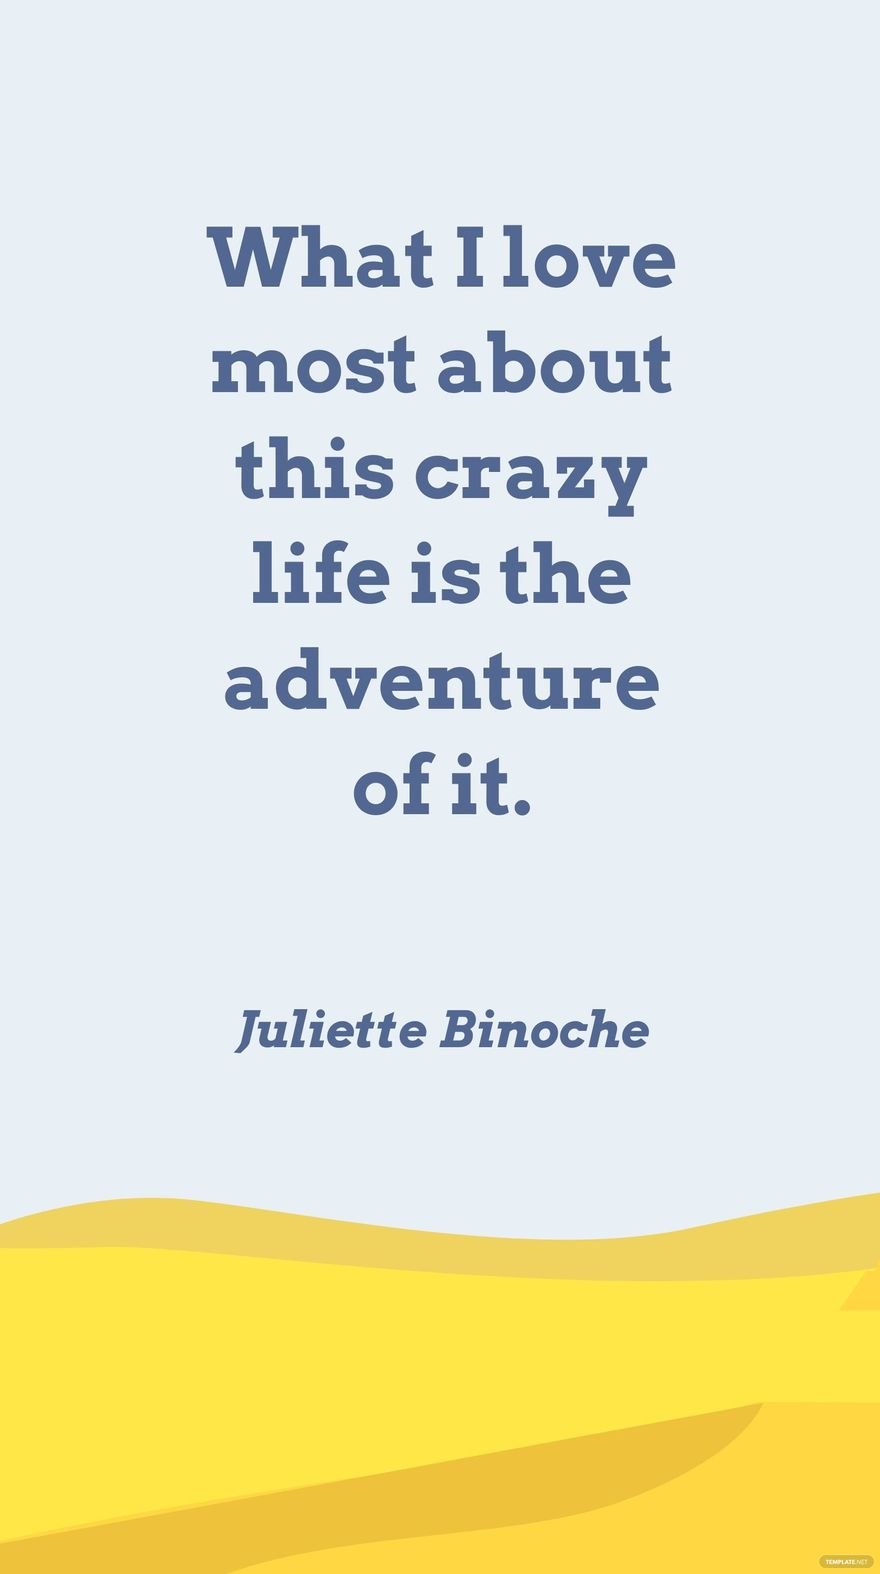 Juliette Binoche - What I love most about this crazy life is the adventure of it.